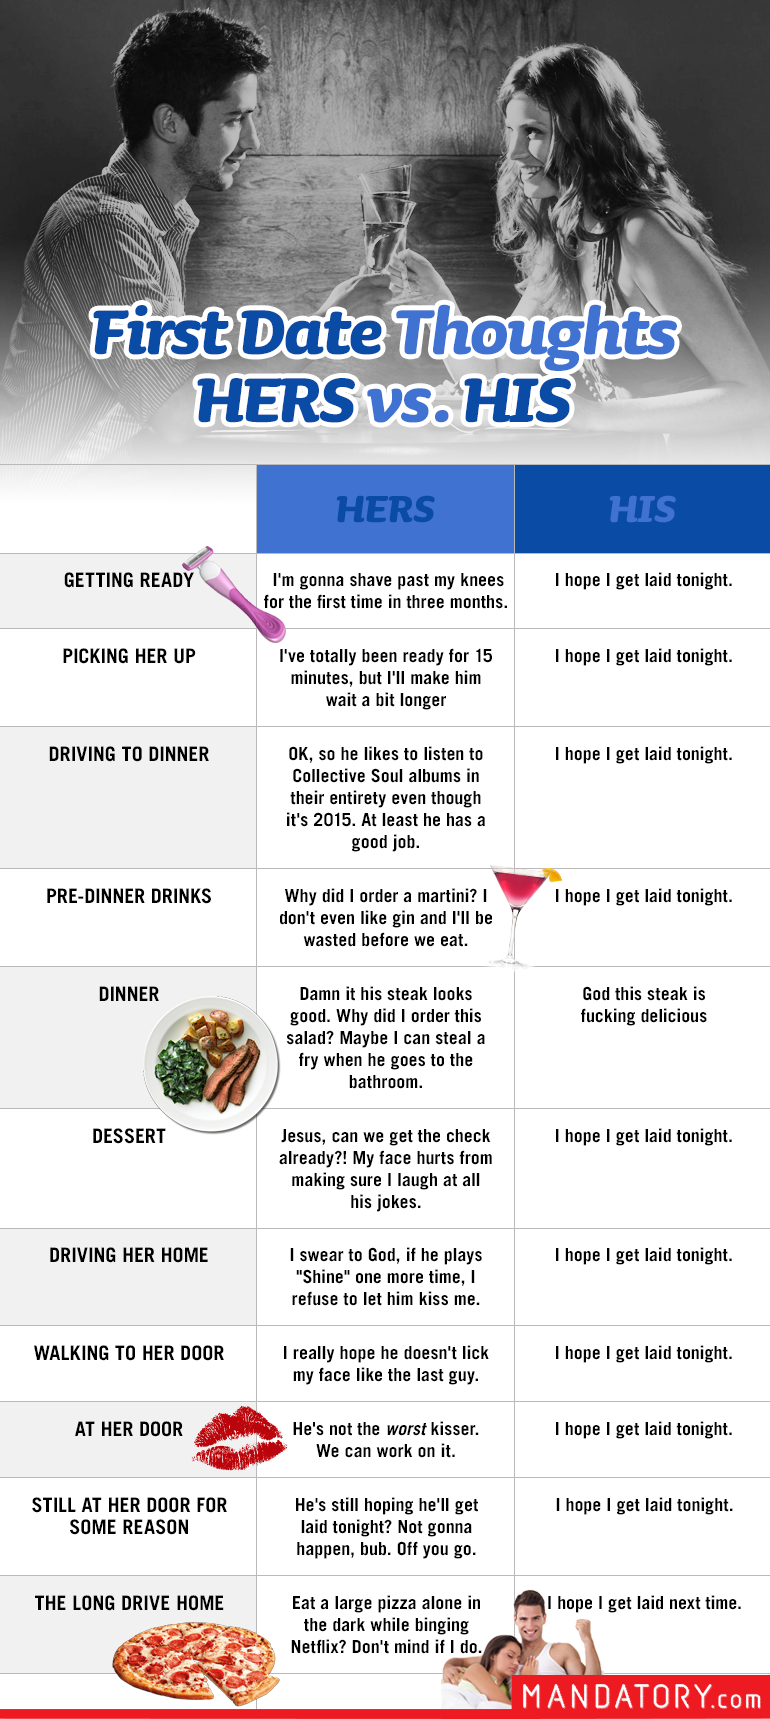 First Date Thoughts: Hers vs. His